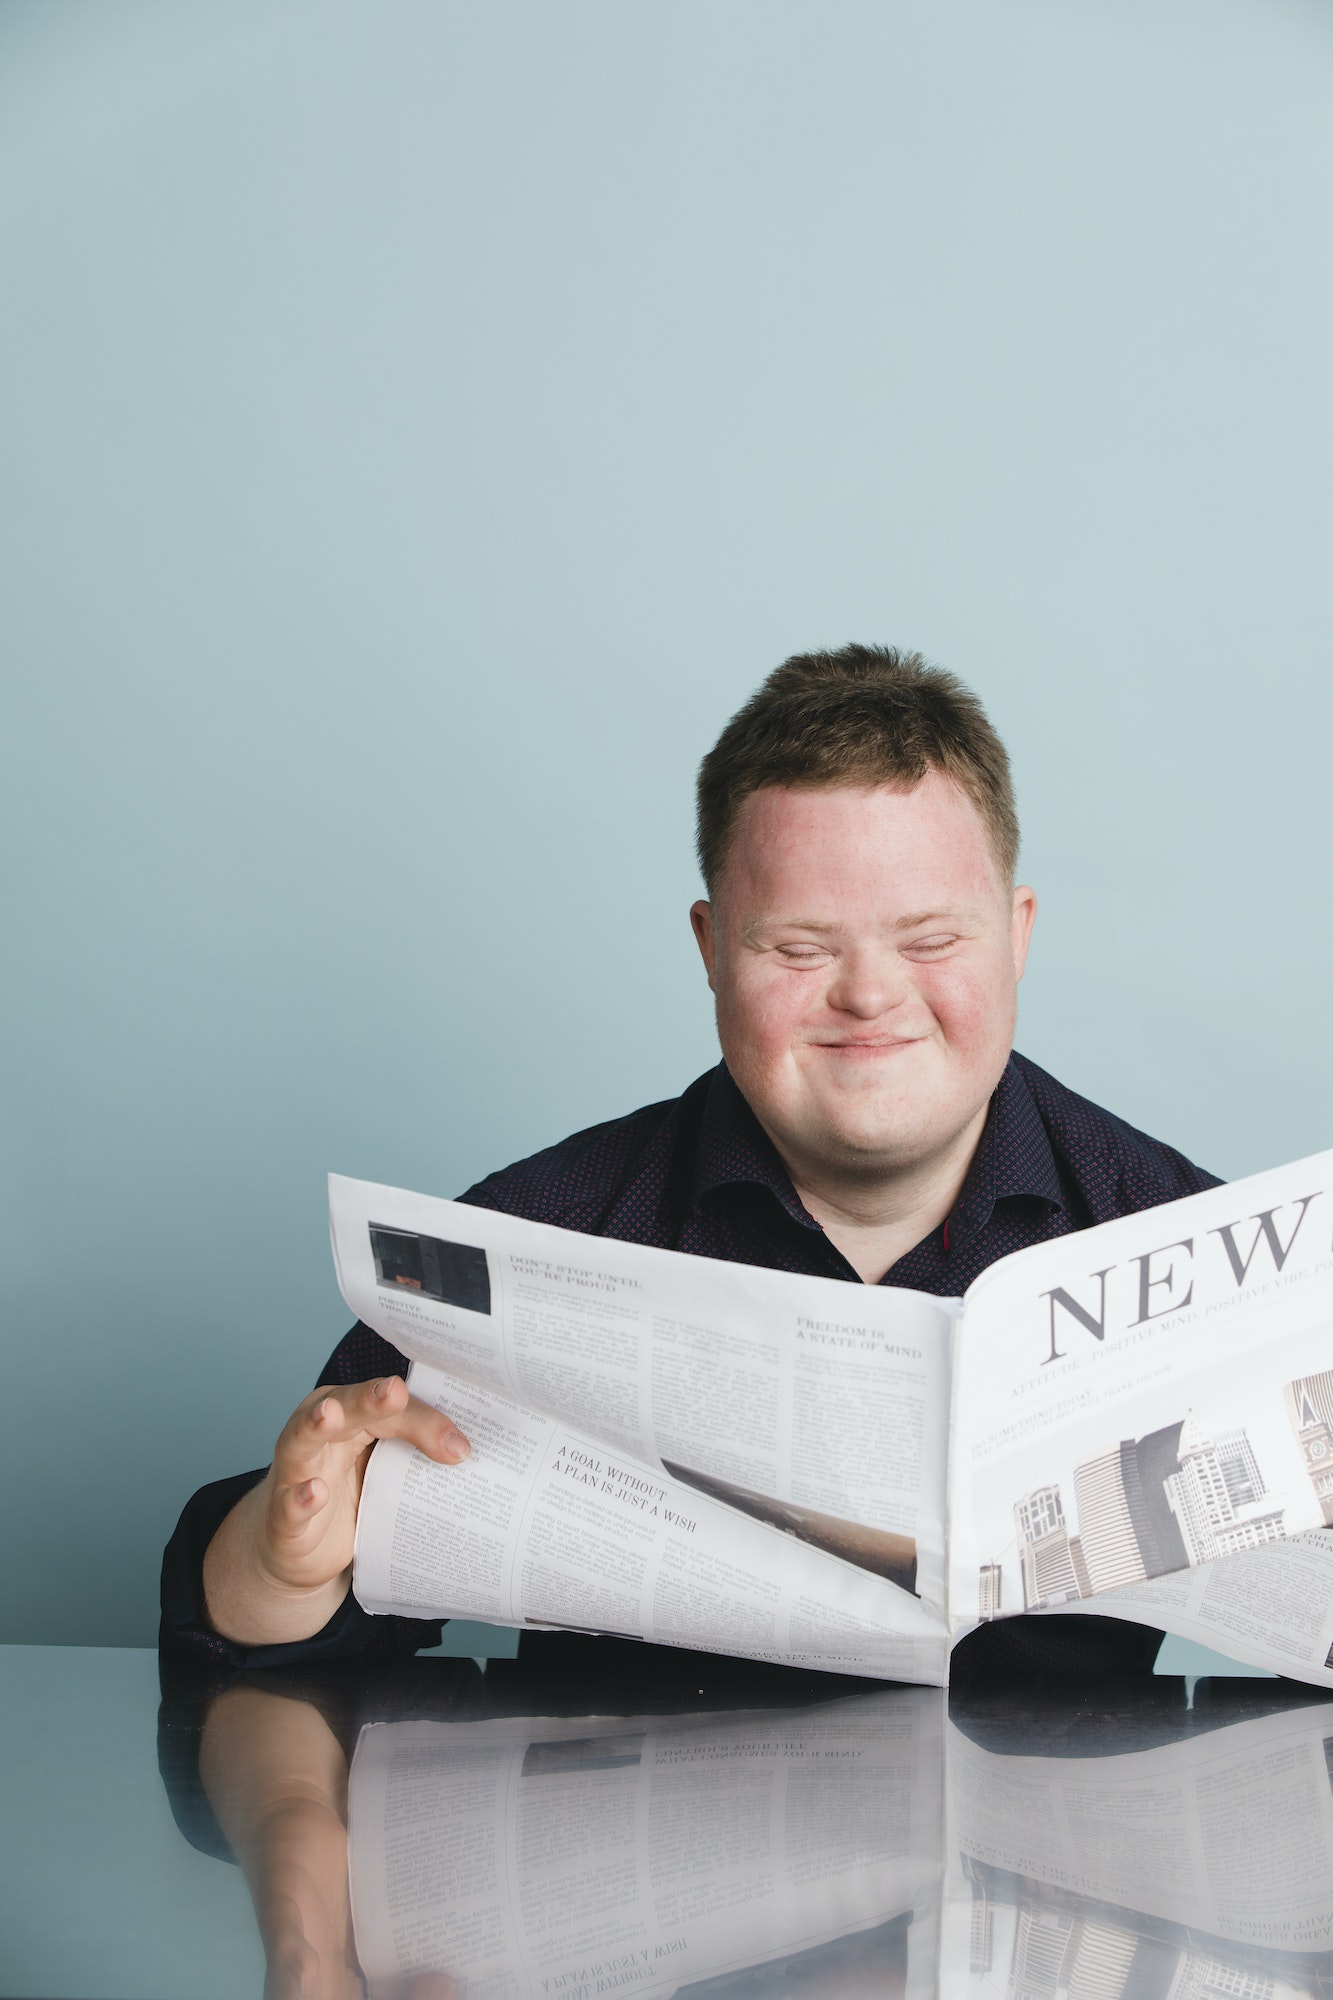 Boy with down syndrome reading a newspaper during the coronavirus pandemic